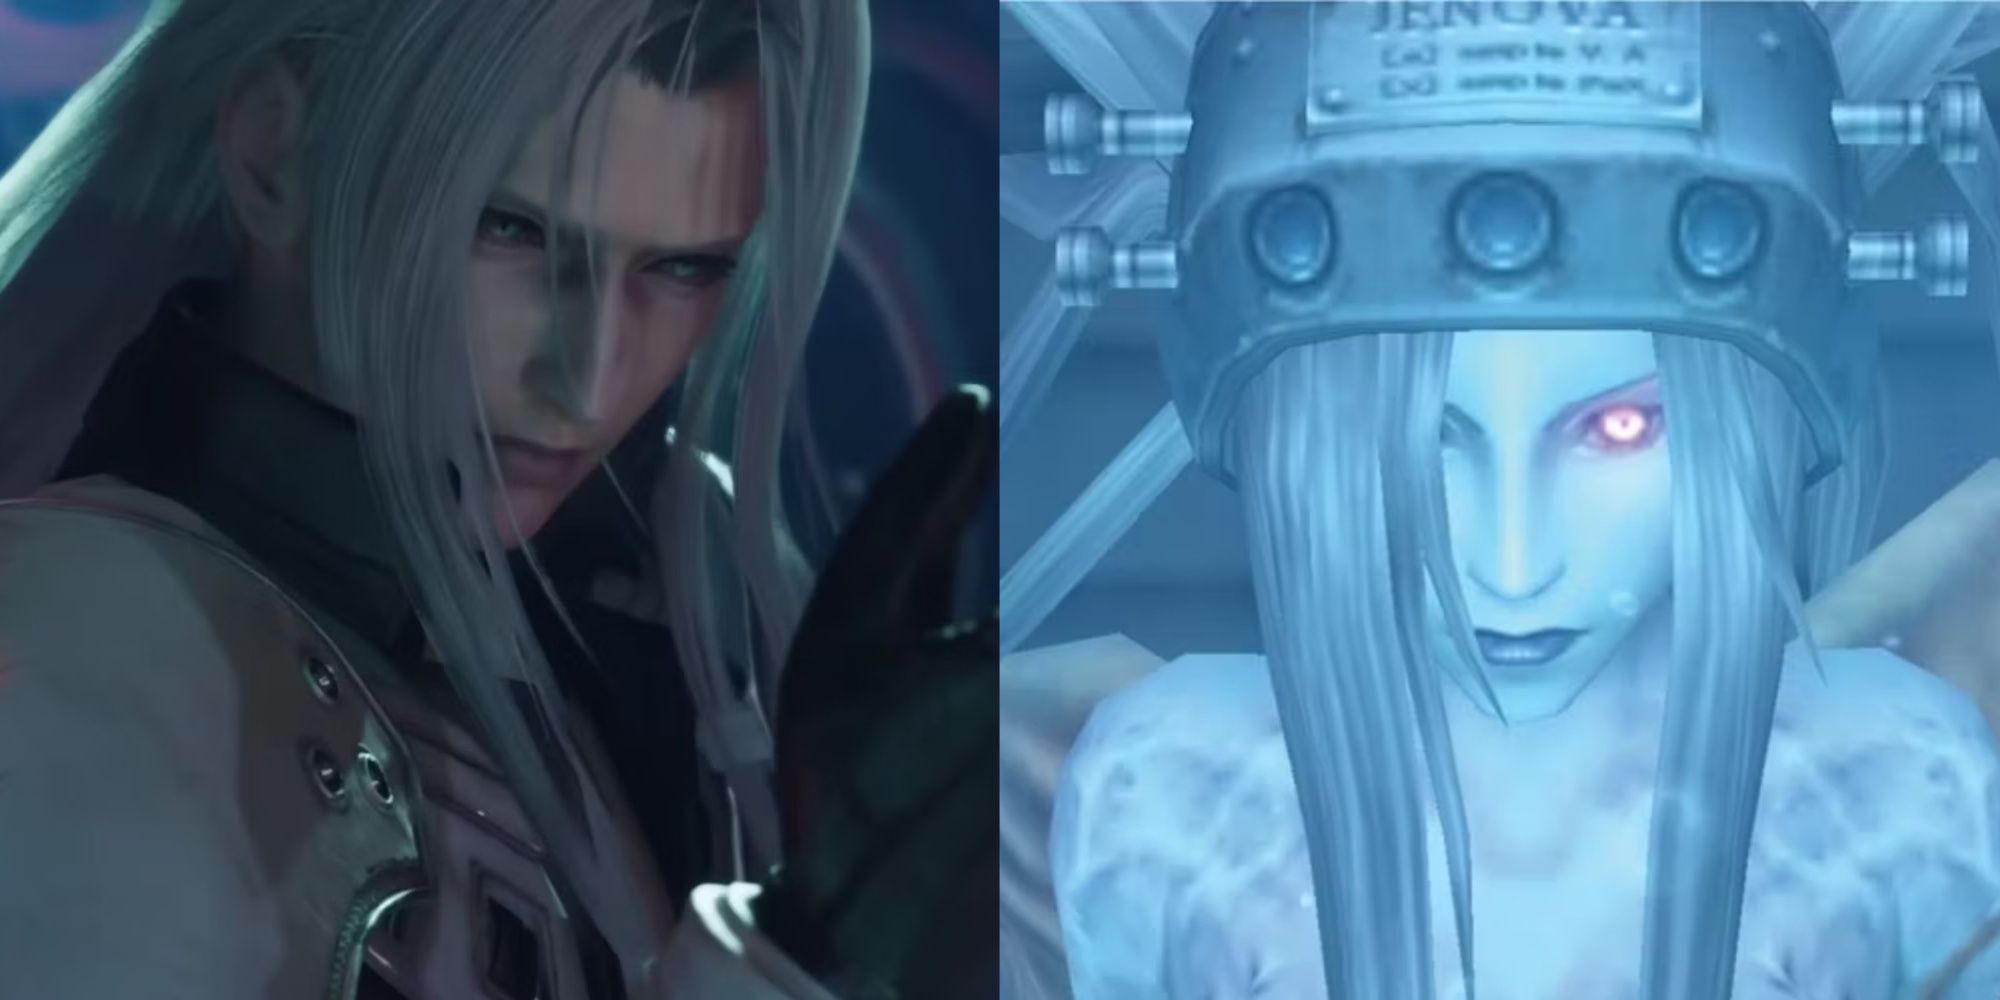 Final Fantasy 7 Sephiroth looking at his hand, and Jenova in their containment tube, left to right.